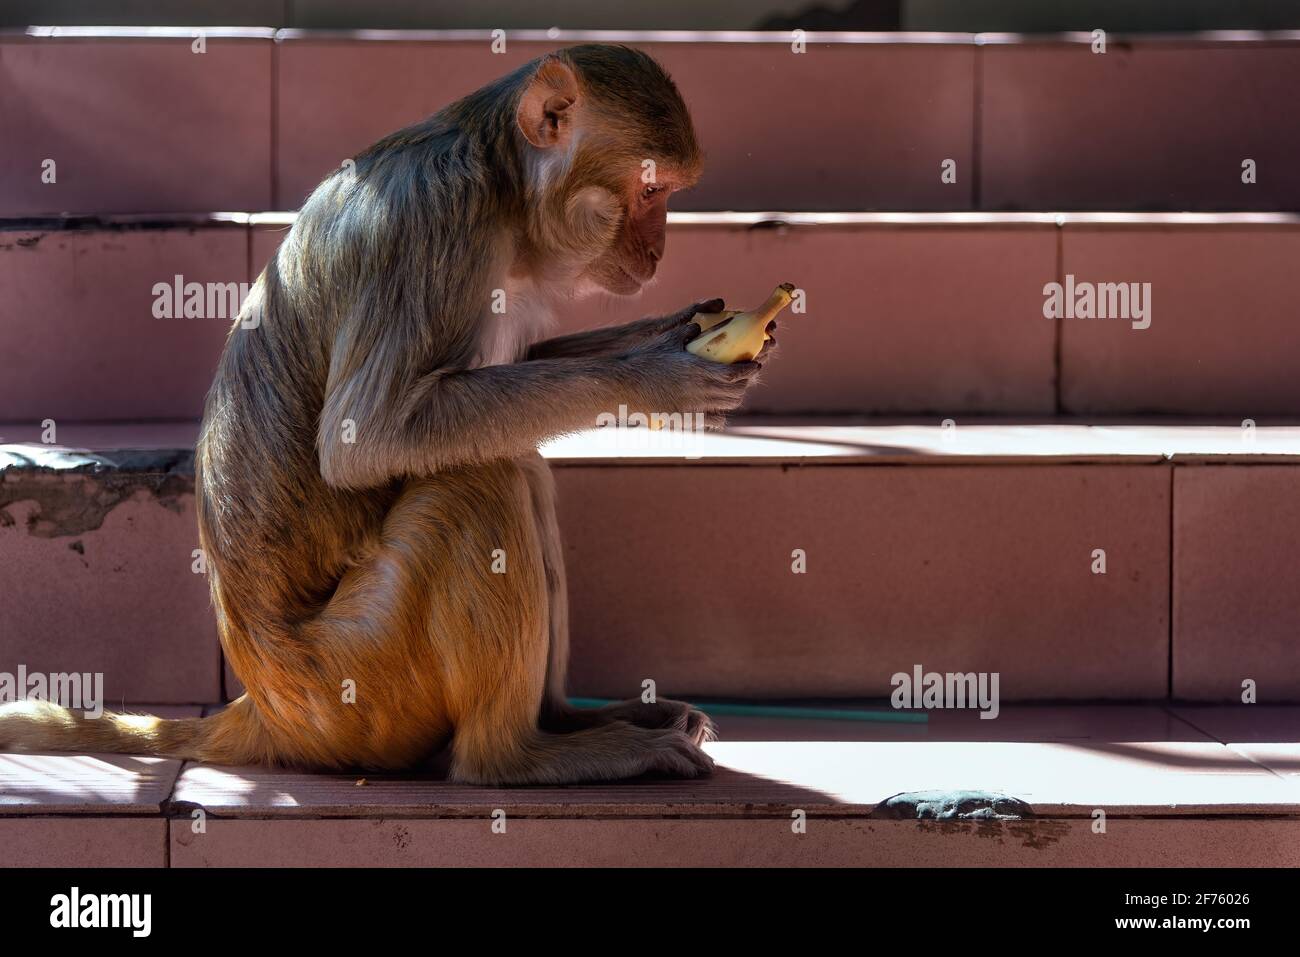 Macaque on Mount Popa staircase peeling a banana, Myanmar. Mount Popa is a pilgrimage site were macaque monkeys roam wild creating all sorts of havoc Stock Photo